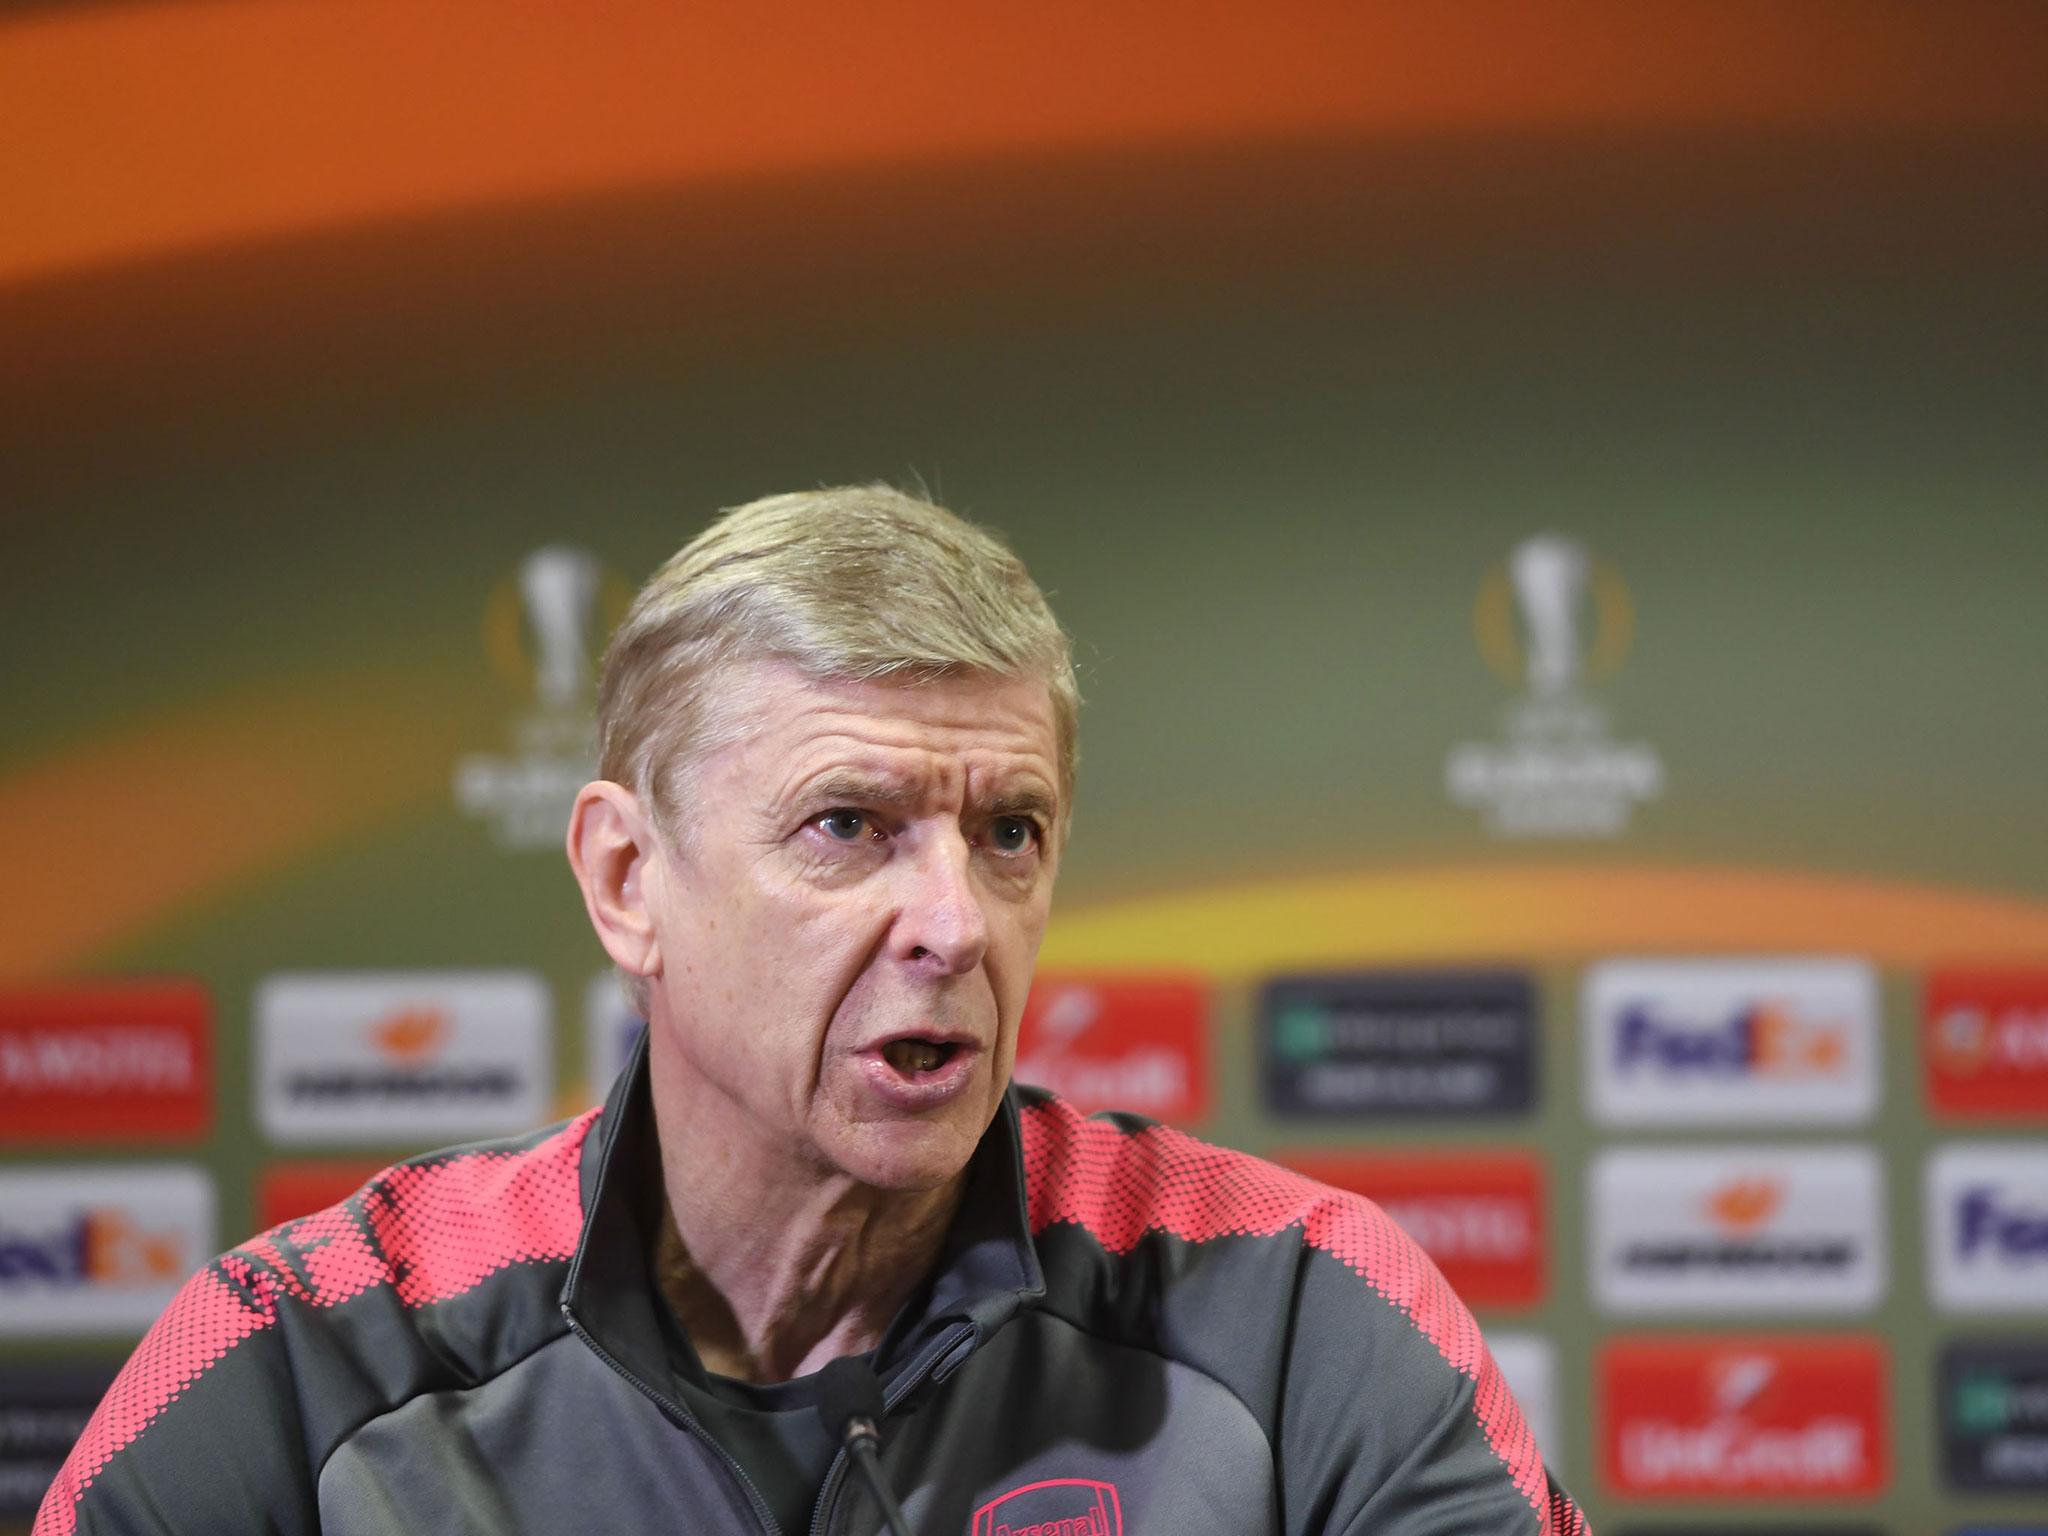 The Arsenal manager said the situation between the UK and Russia remains 'complicated'